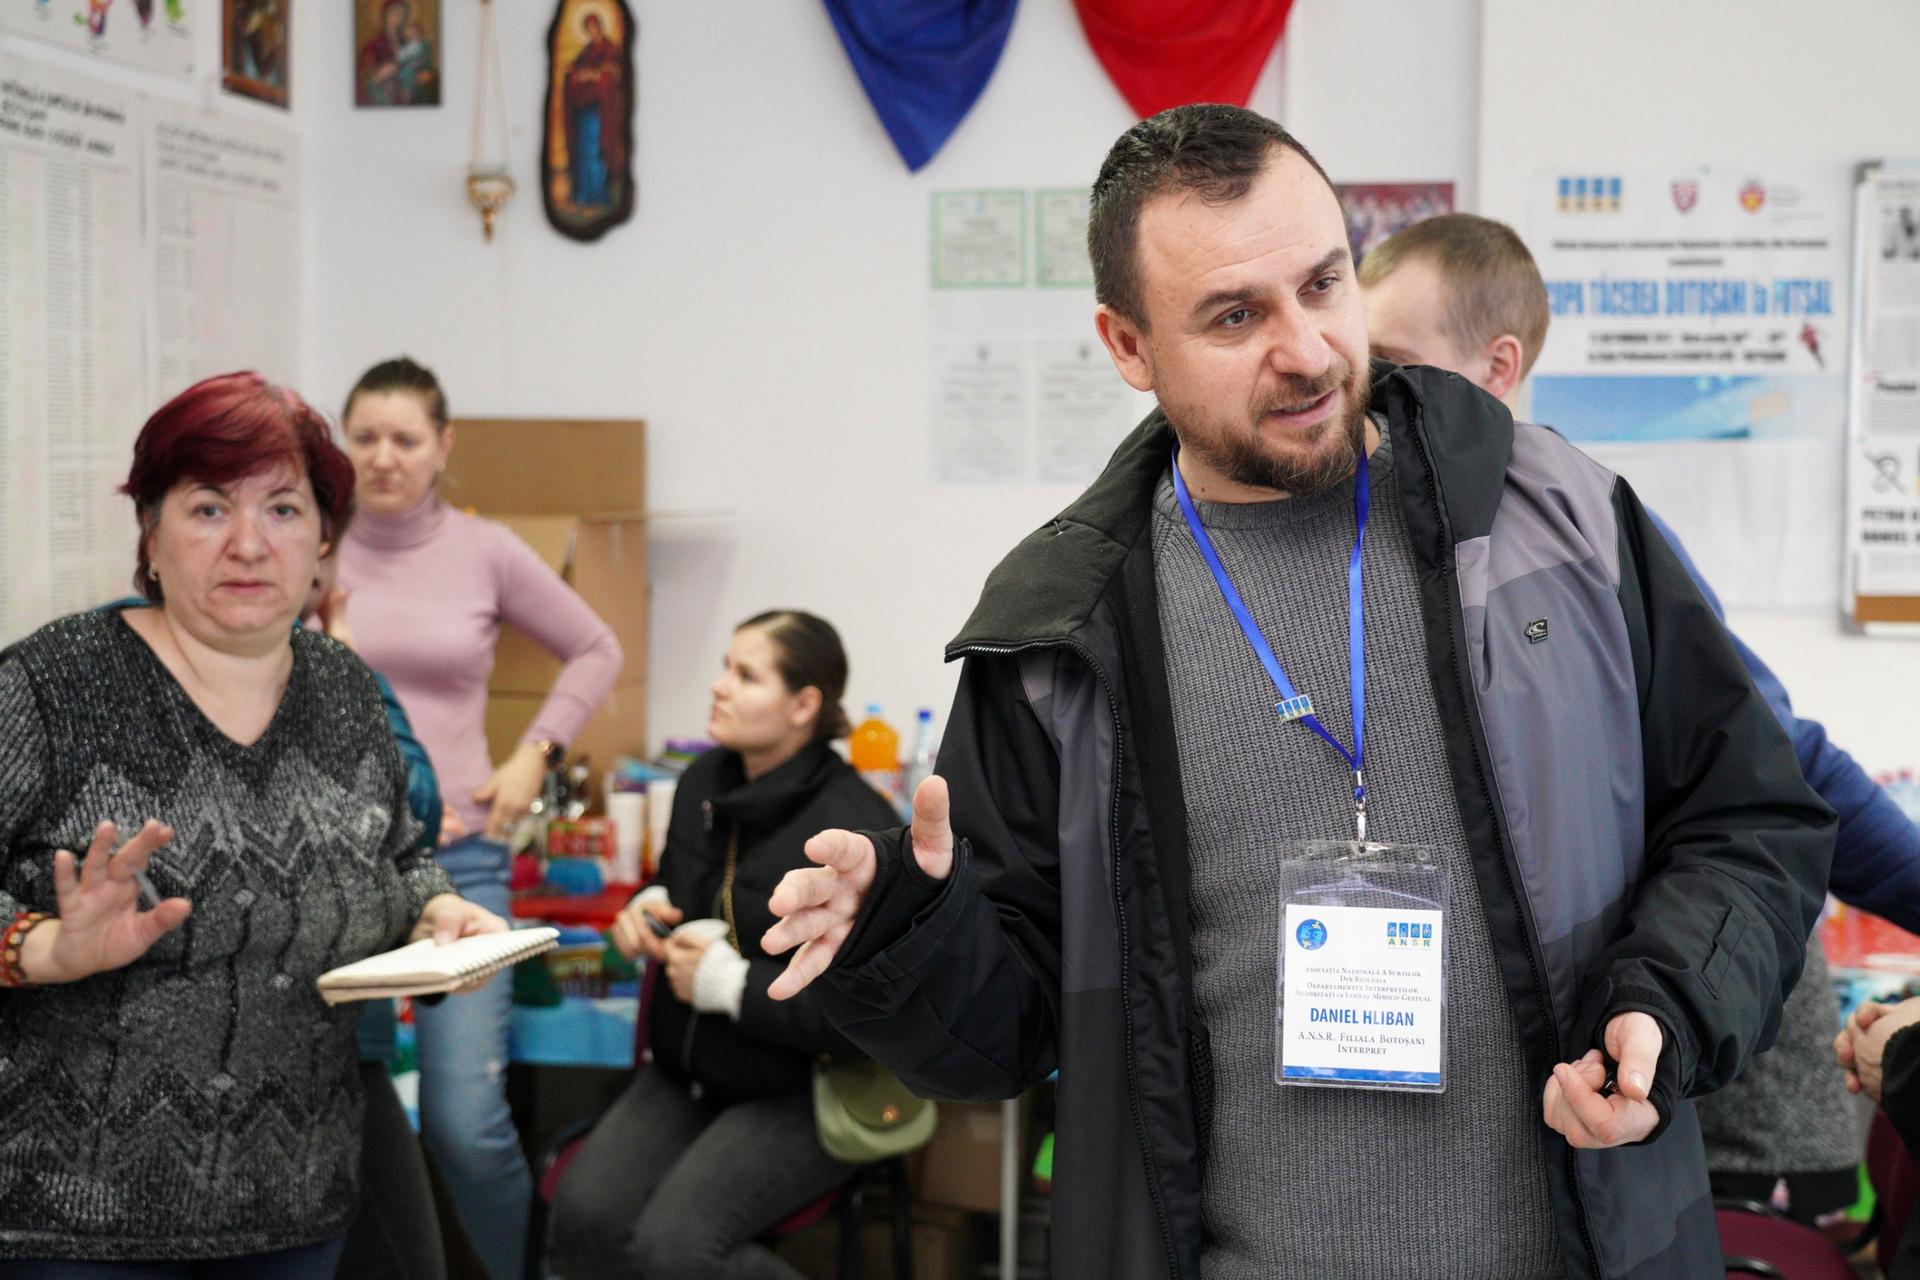 Daniel Hliban is the director of the local Botosani branch of Romania's national deaf association, ANSR. 